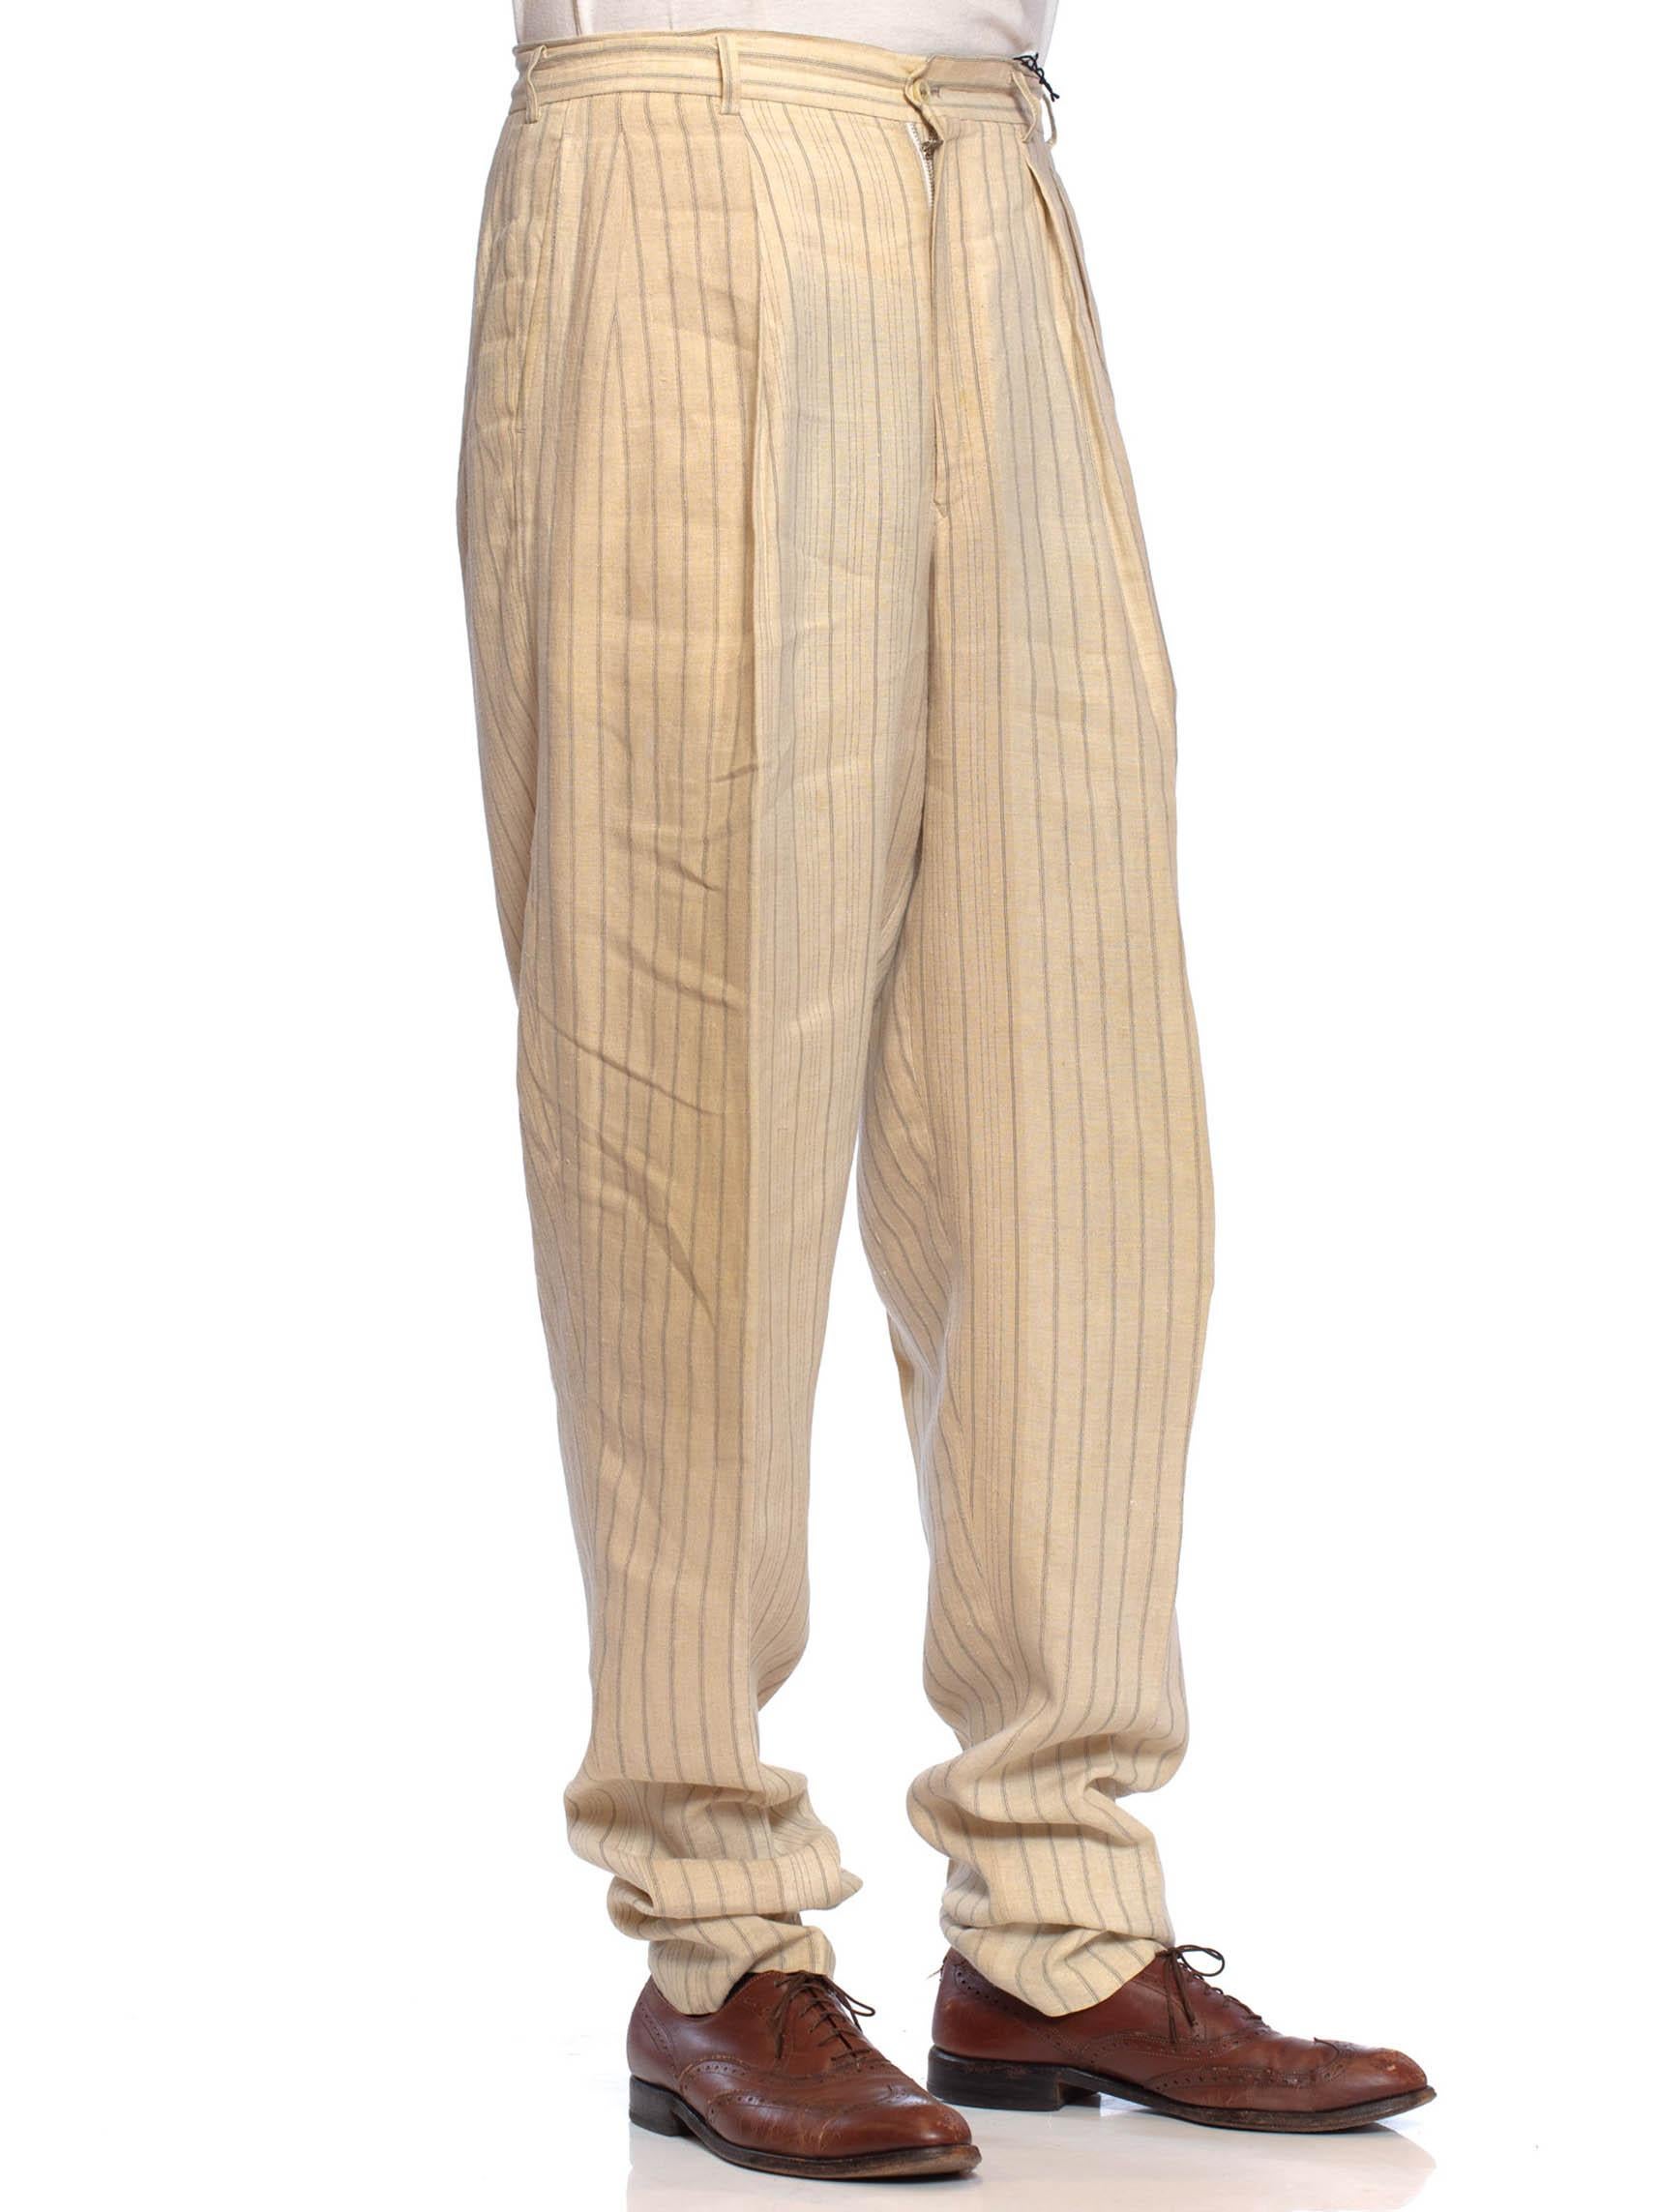 1980S COMME DES GARCONS Creme Striped Linen Mens Pants Which Gather At The Hem In Excellent Condition For Sale In New York, NY